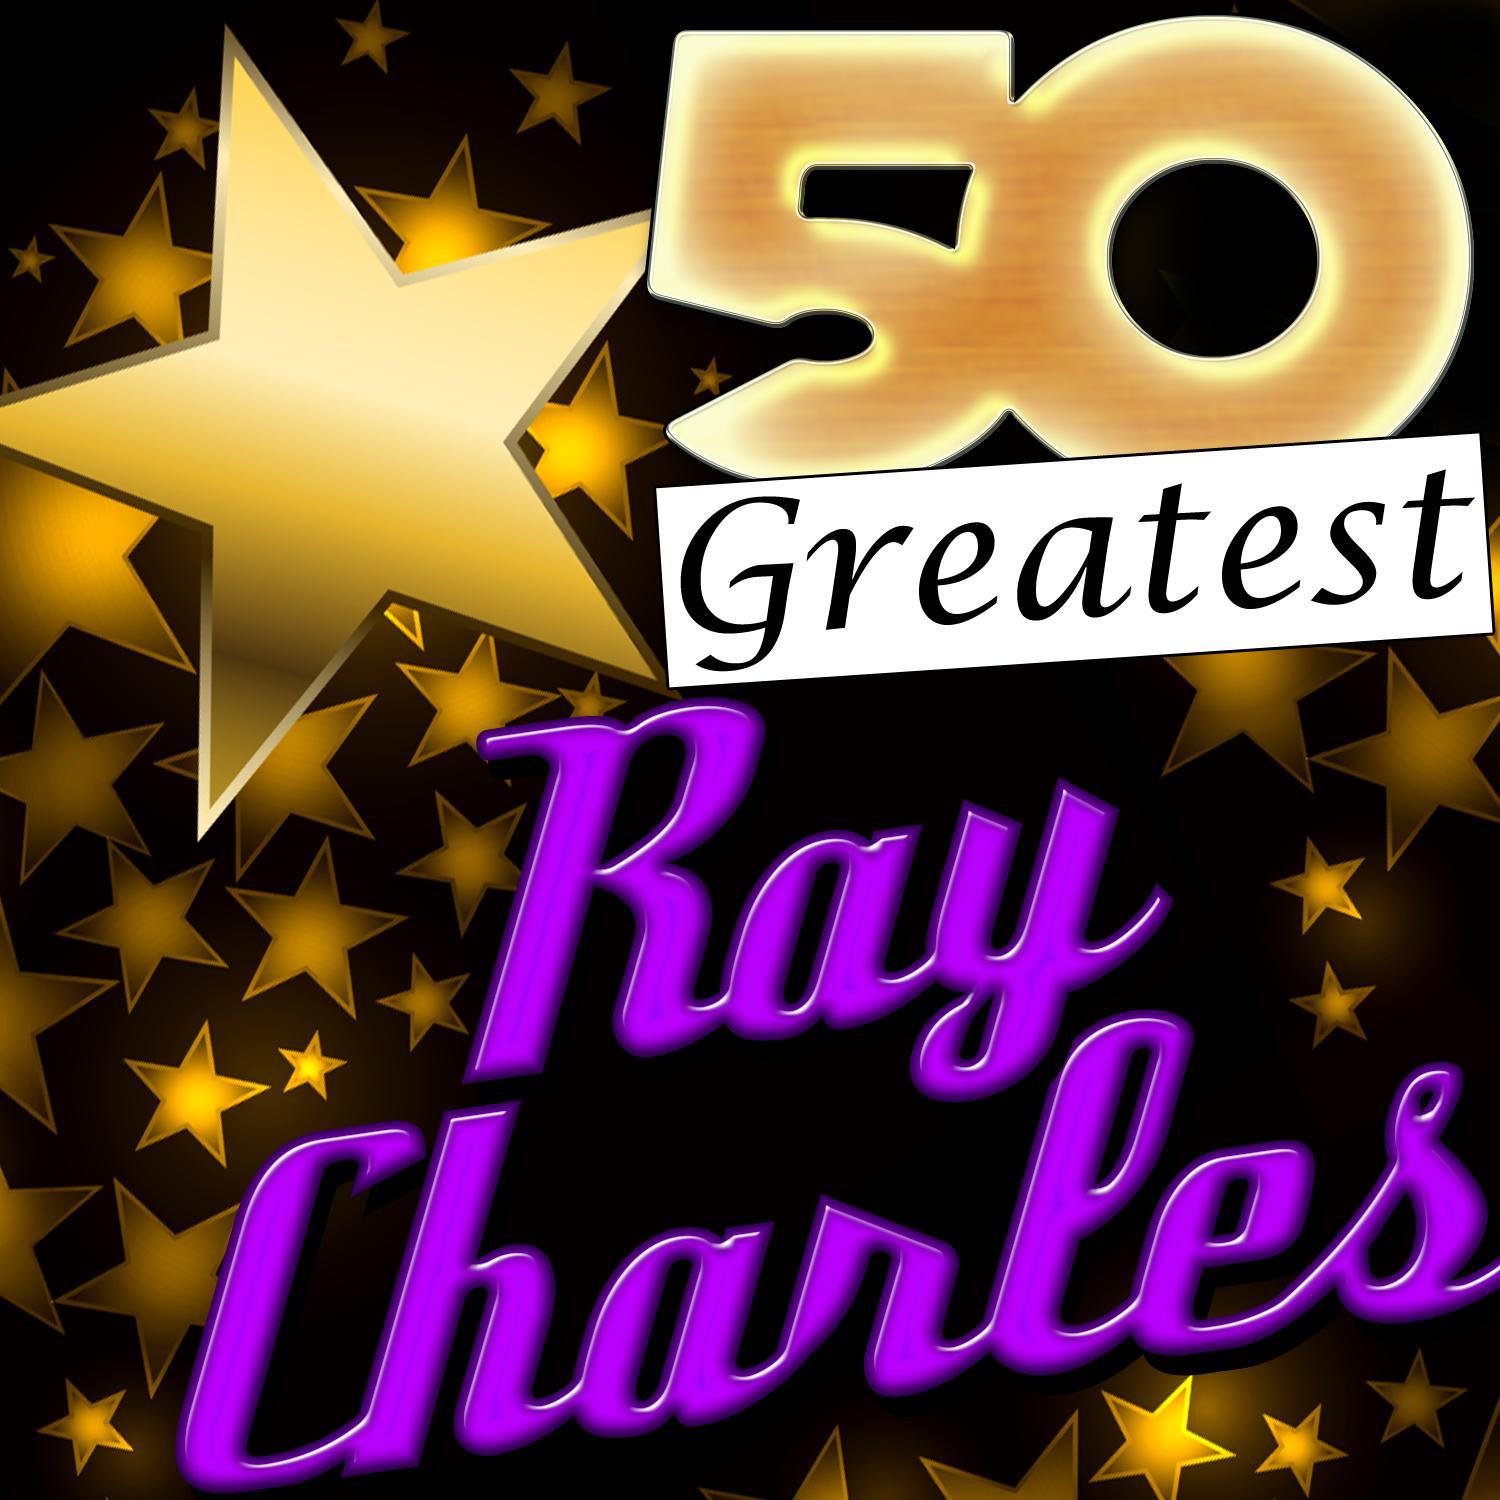 50 Greatest: Ray Charles (Remastered)